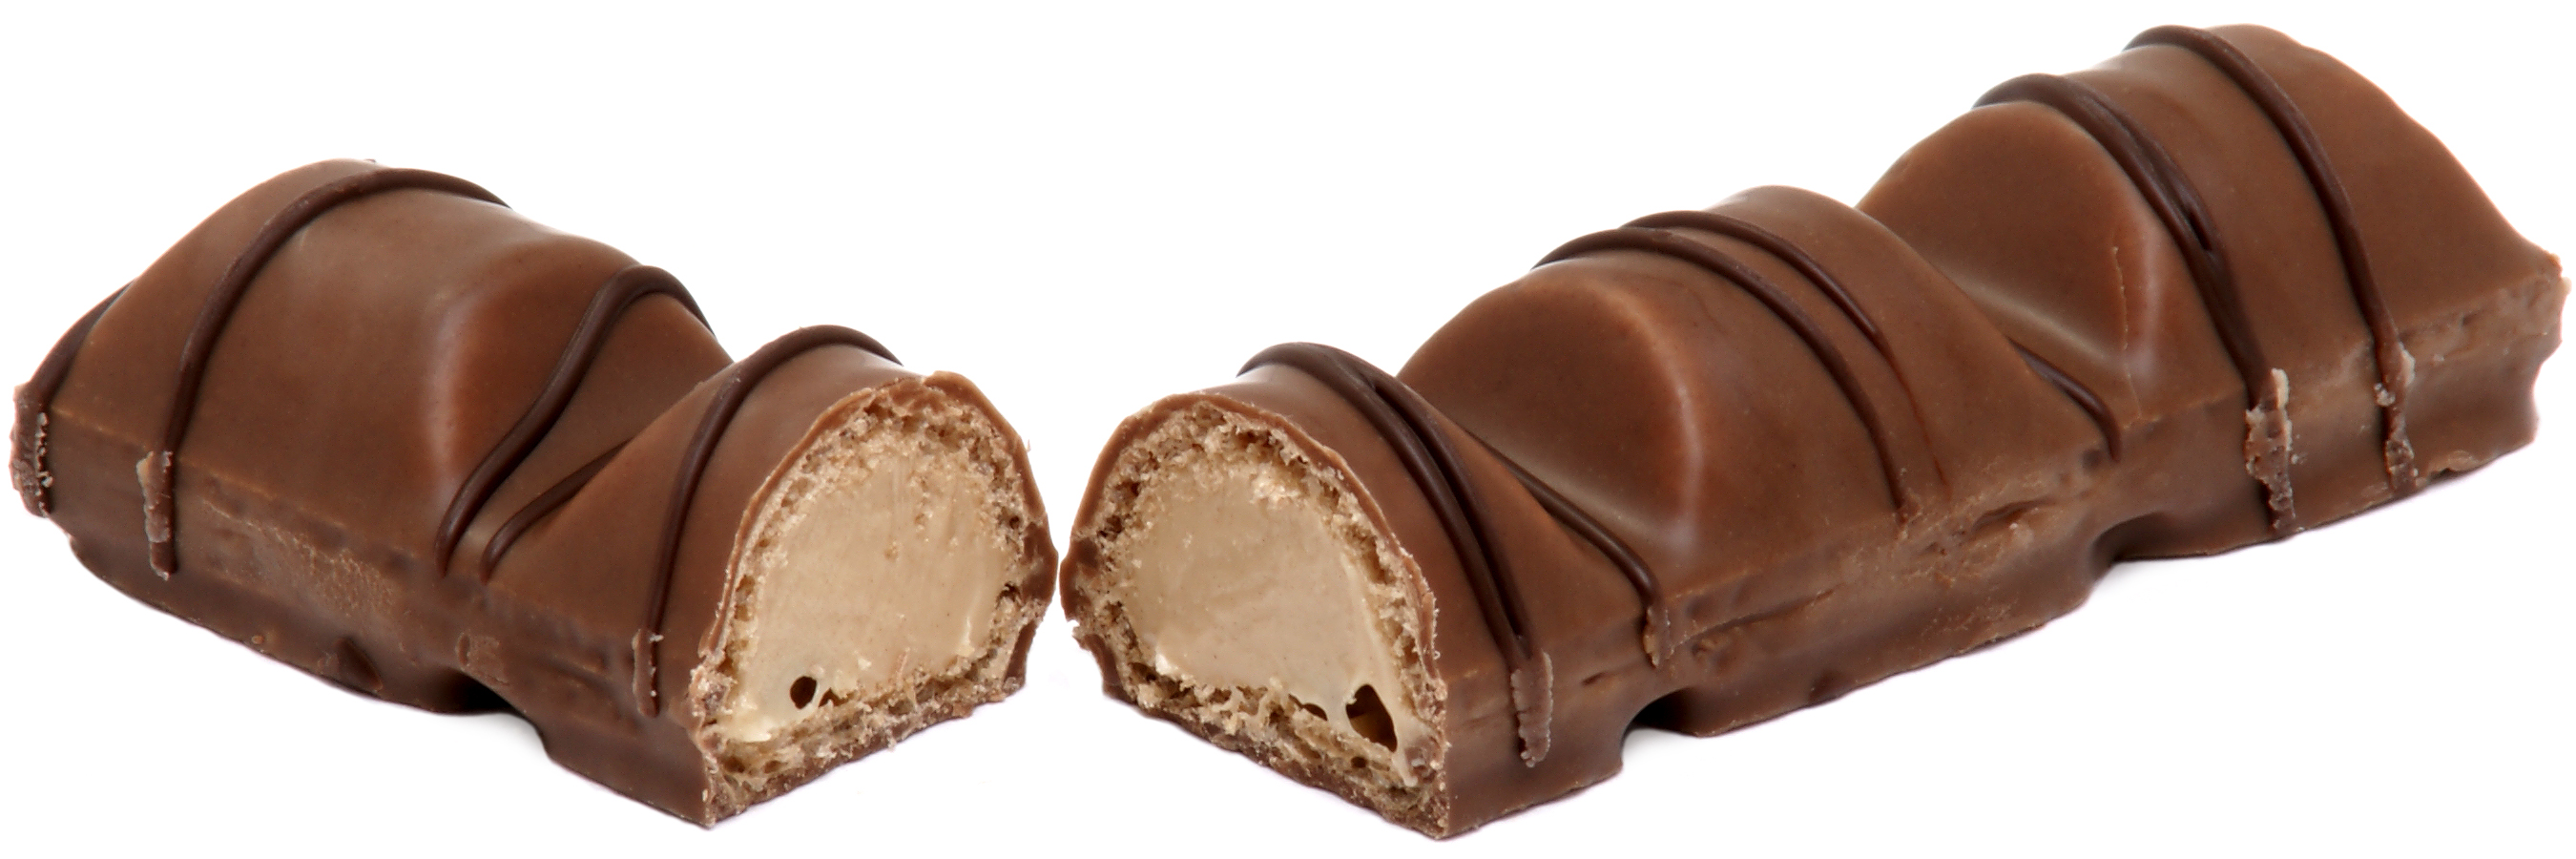 Kinder Bueno, The Candy Encyclopedia Wiki